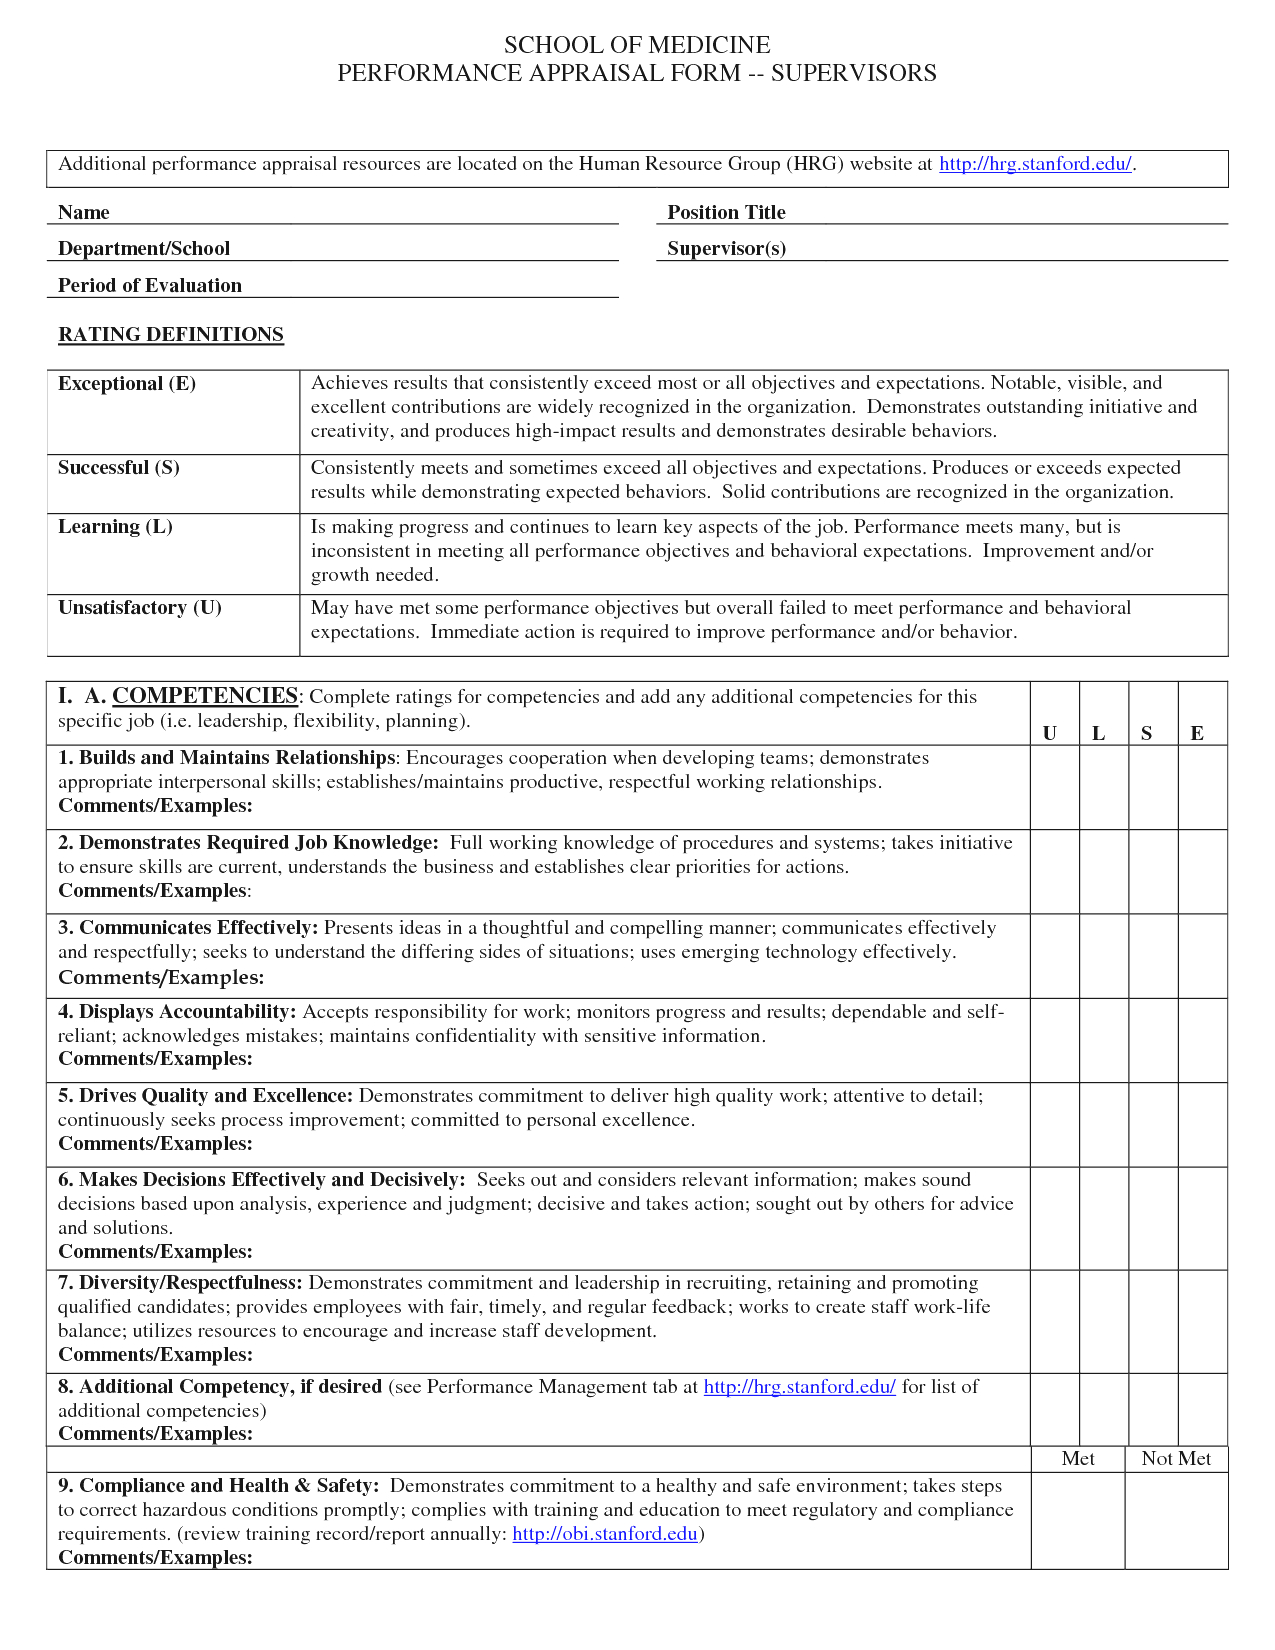 Employee Performance Evaluation Report Sample And In Website Evaluation Report Template